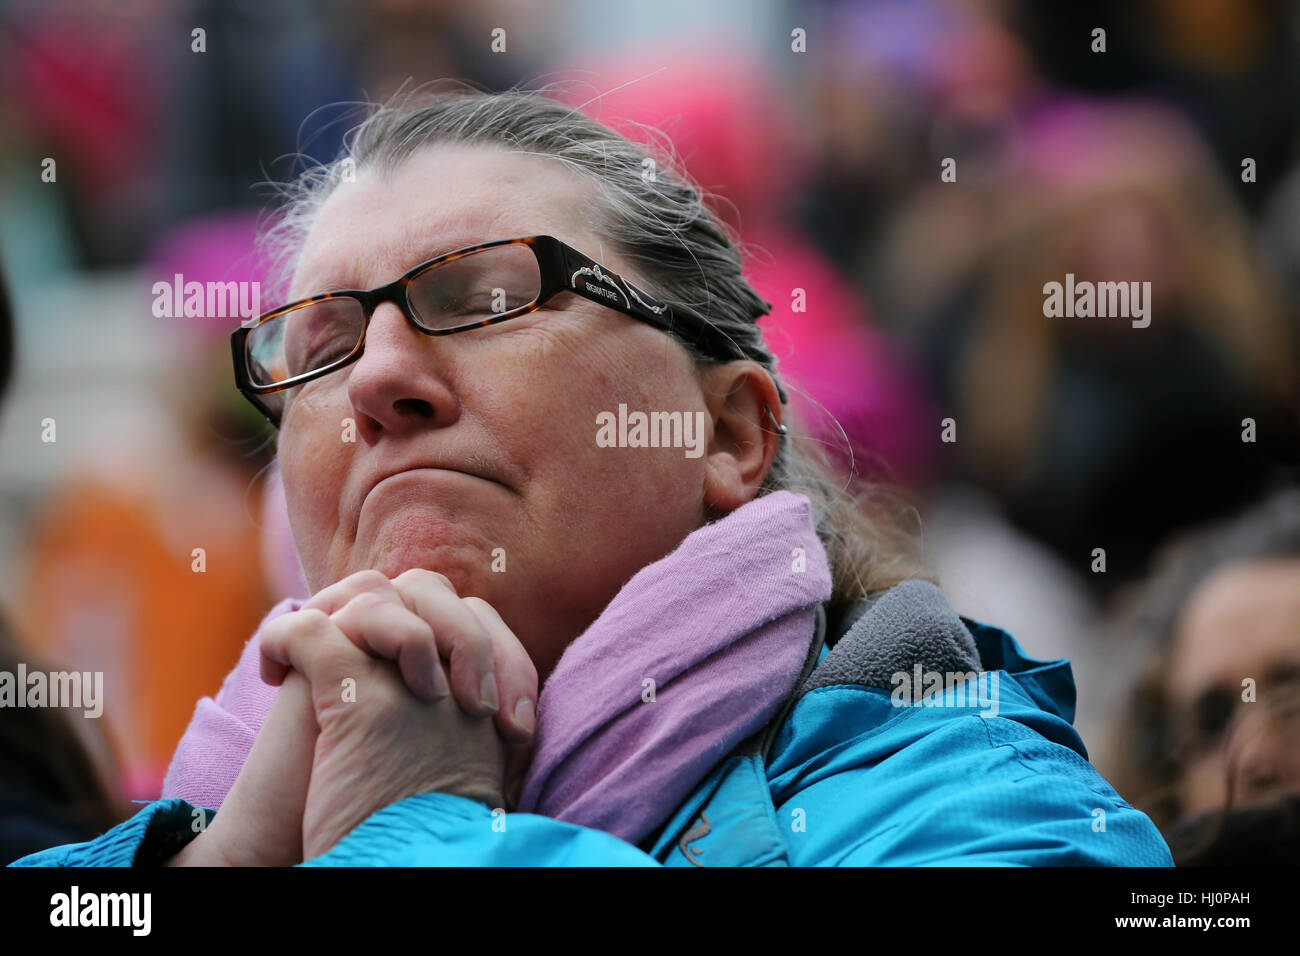 Kingston, Canada. 21st Jan, 2017. A woman prayers during one of the speaker during the Women's march in Kingston. The march is in support with the Women's march in Washington, D.C. Credit: Lars Hagberg/Alamy Live News Stock Photo